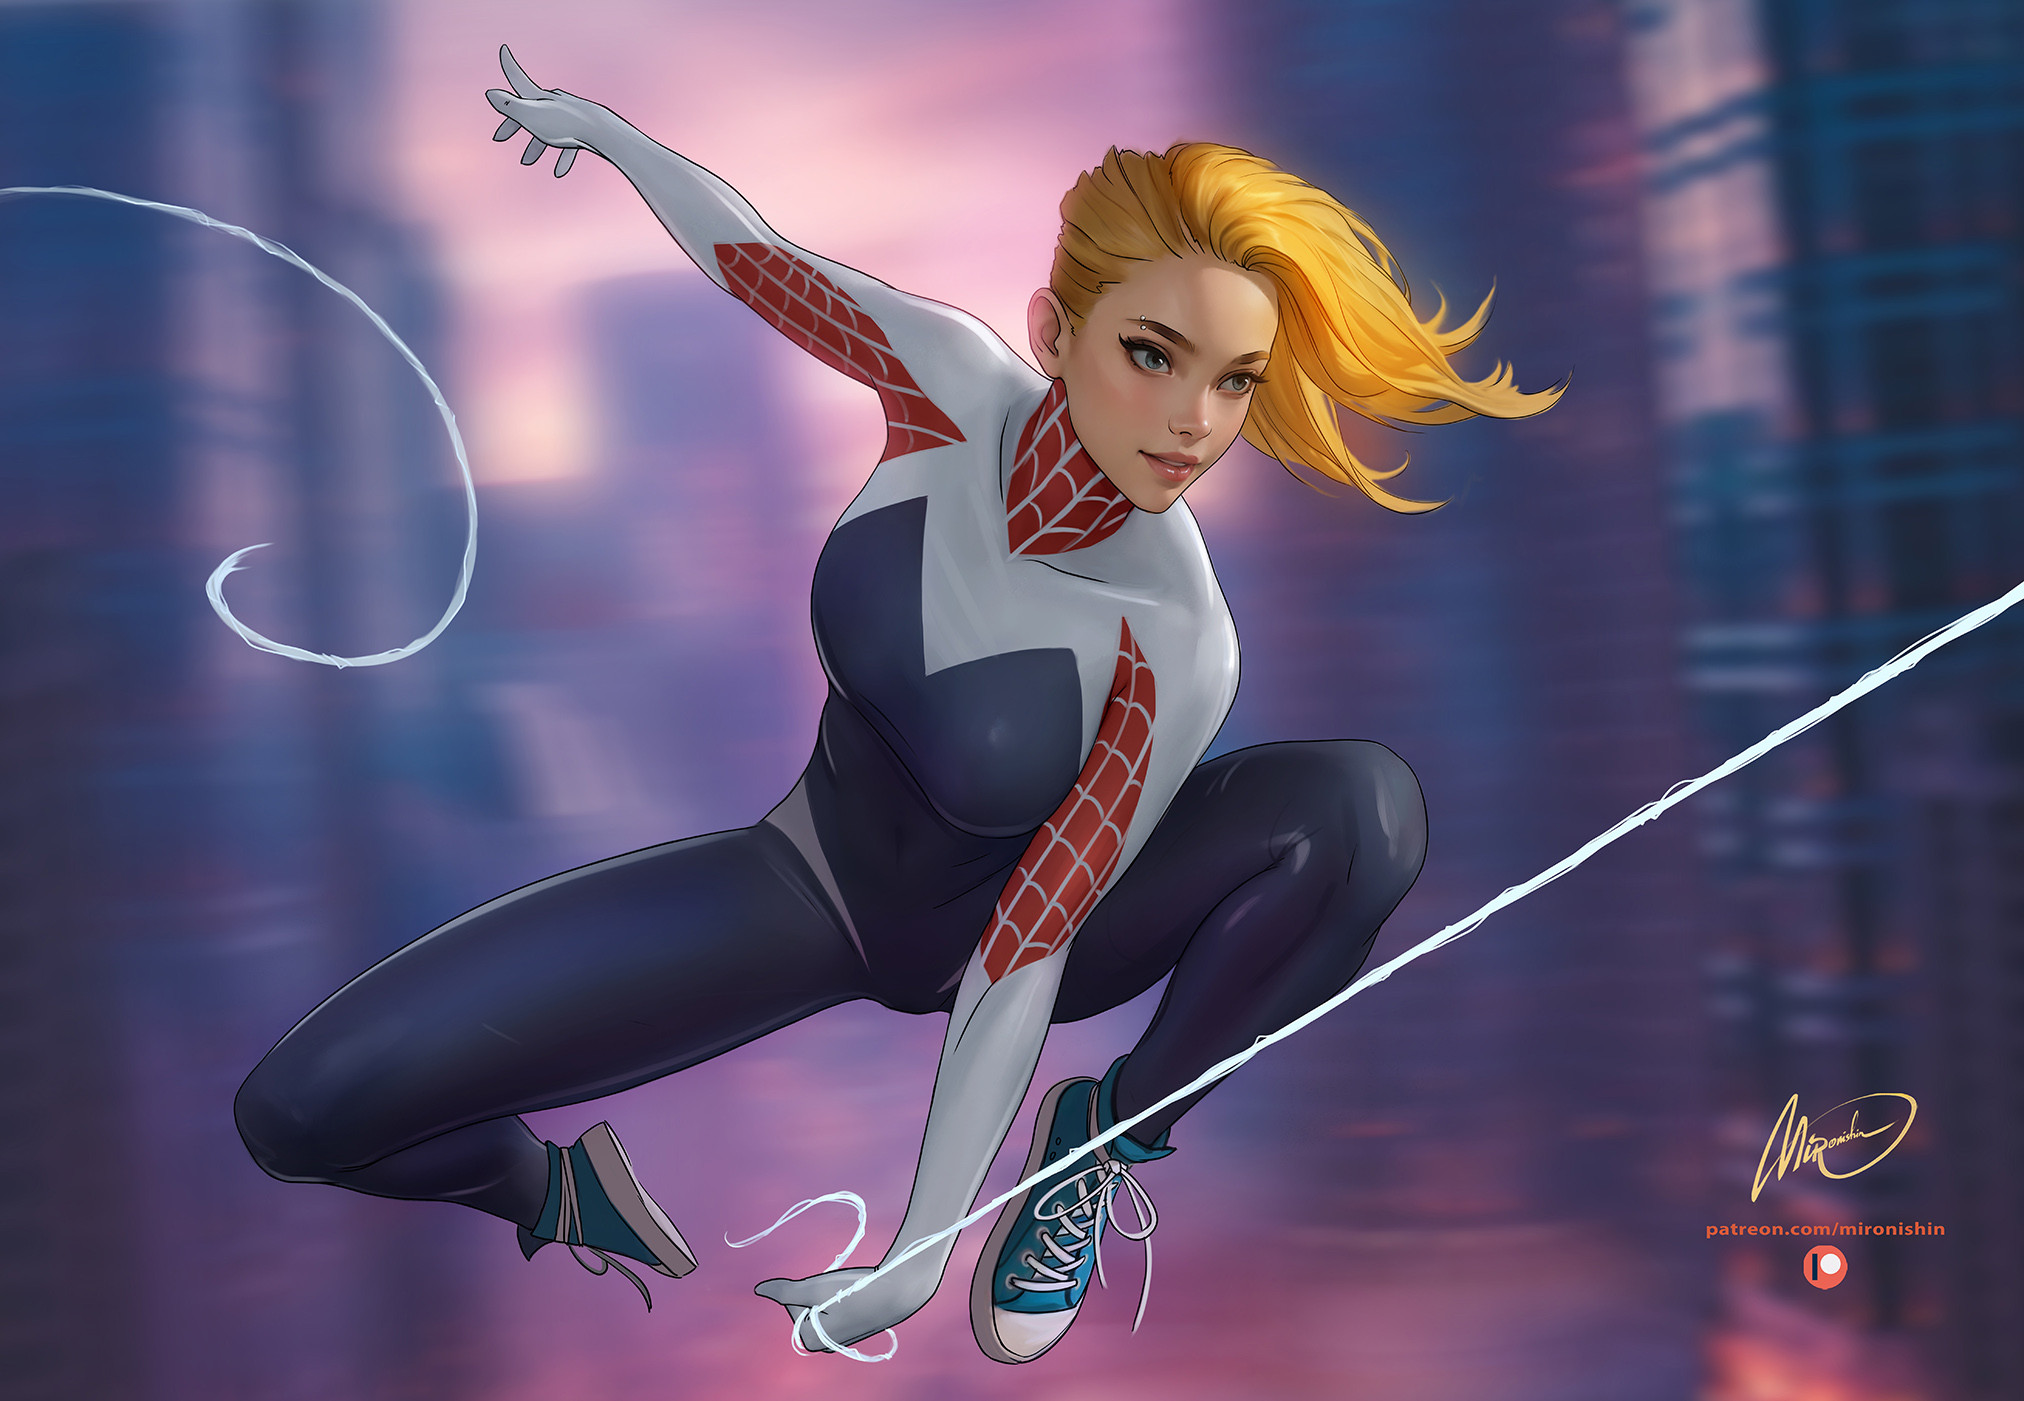 General 2024x1401 Mironishin Story drawing Gwen Stacy sneakers piercing motion blur Ghost Spider Spider Gwen digital art watermarked bent legs AI art